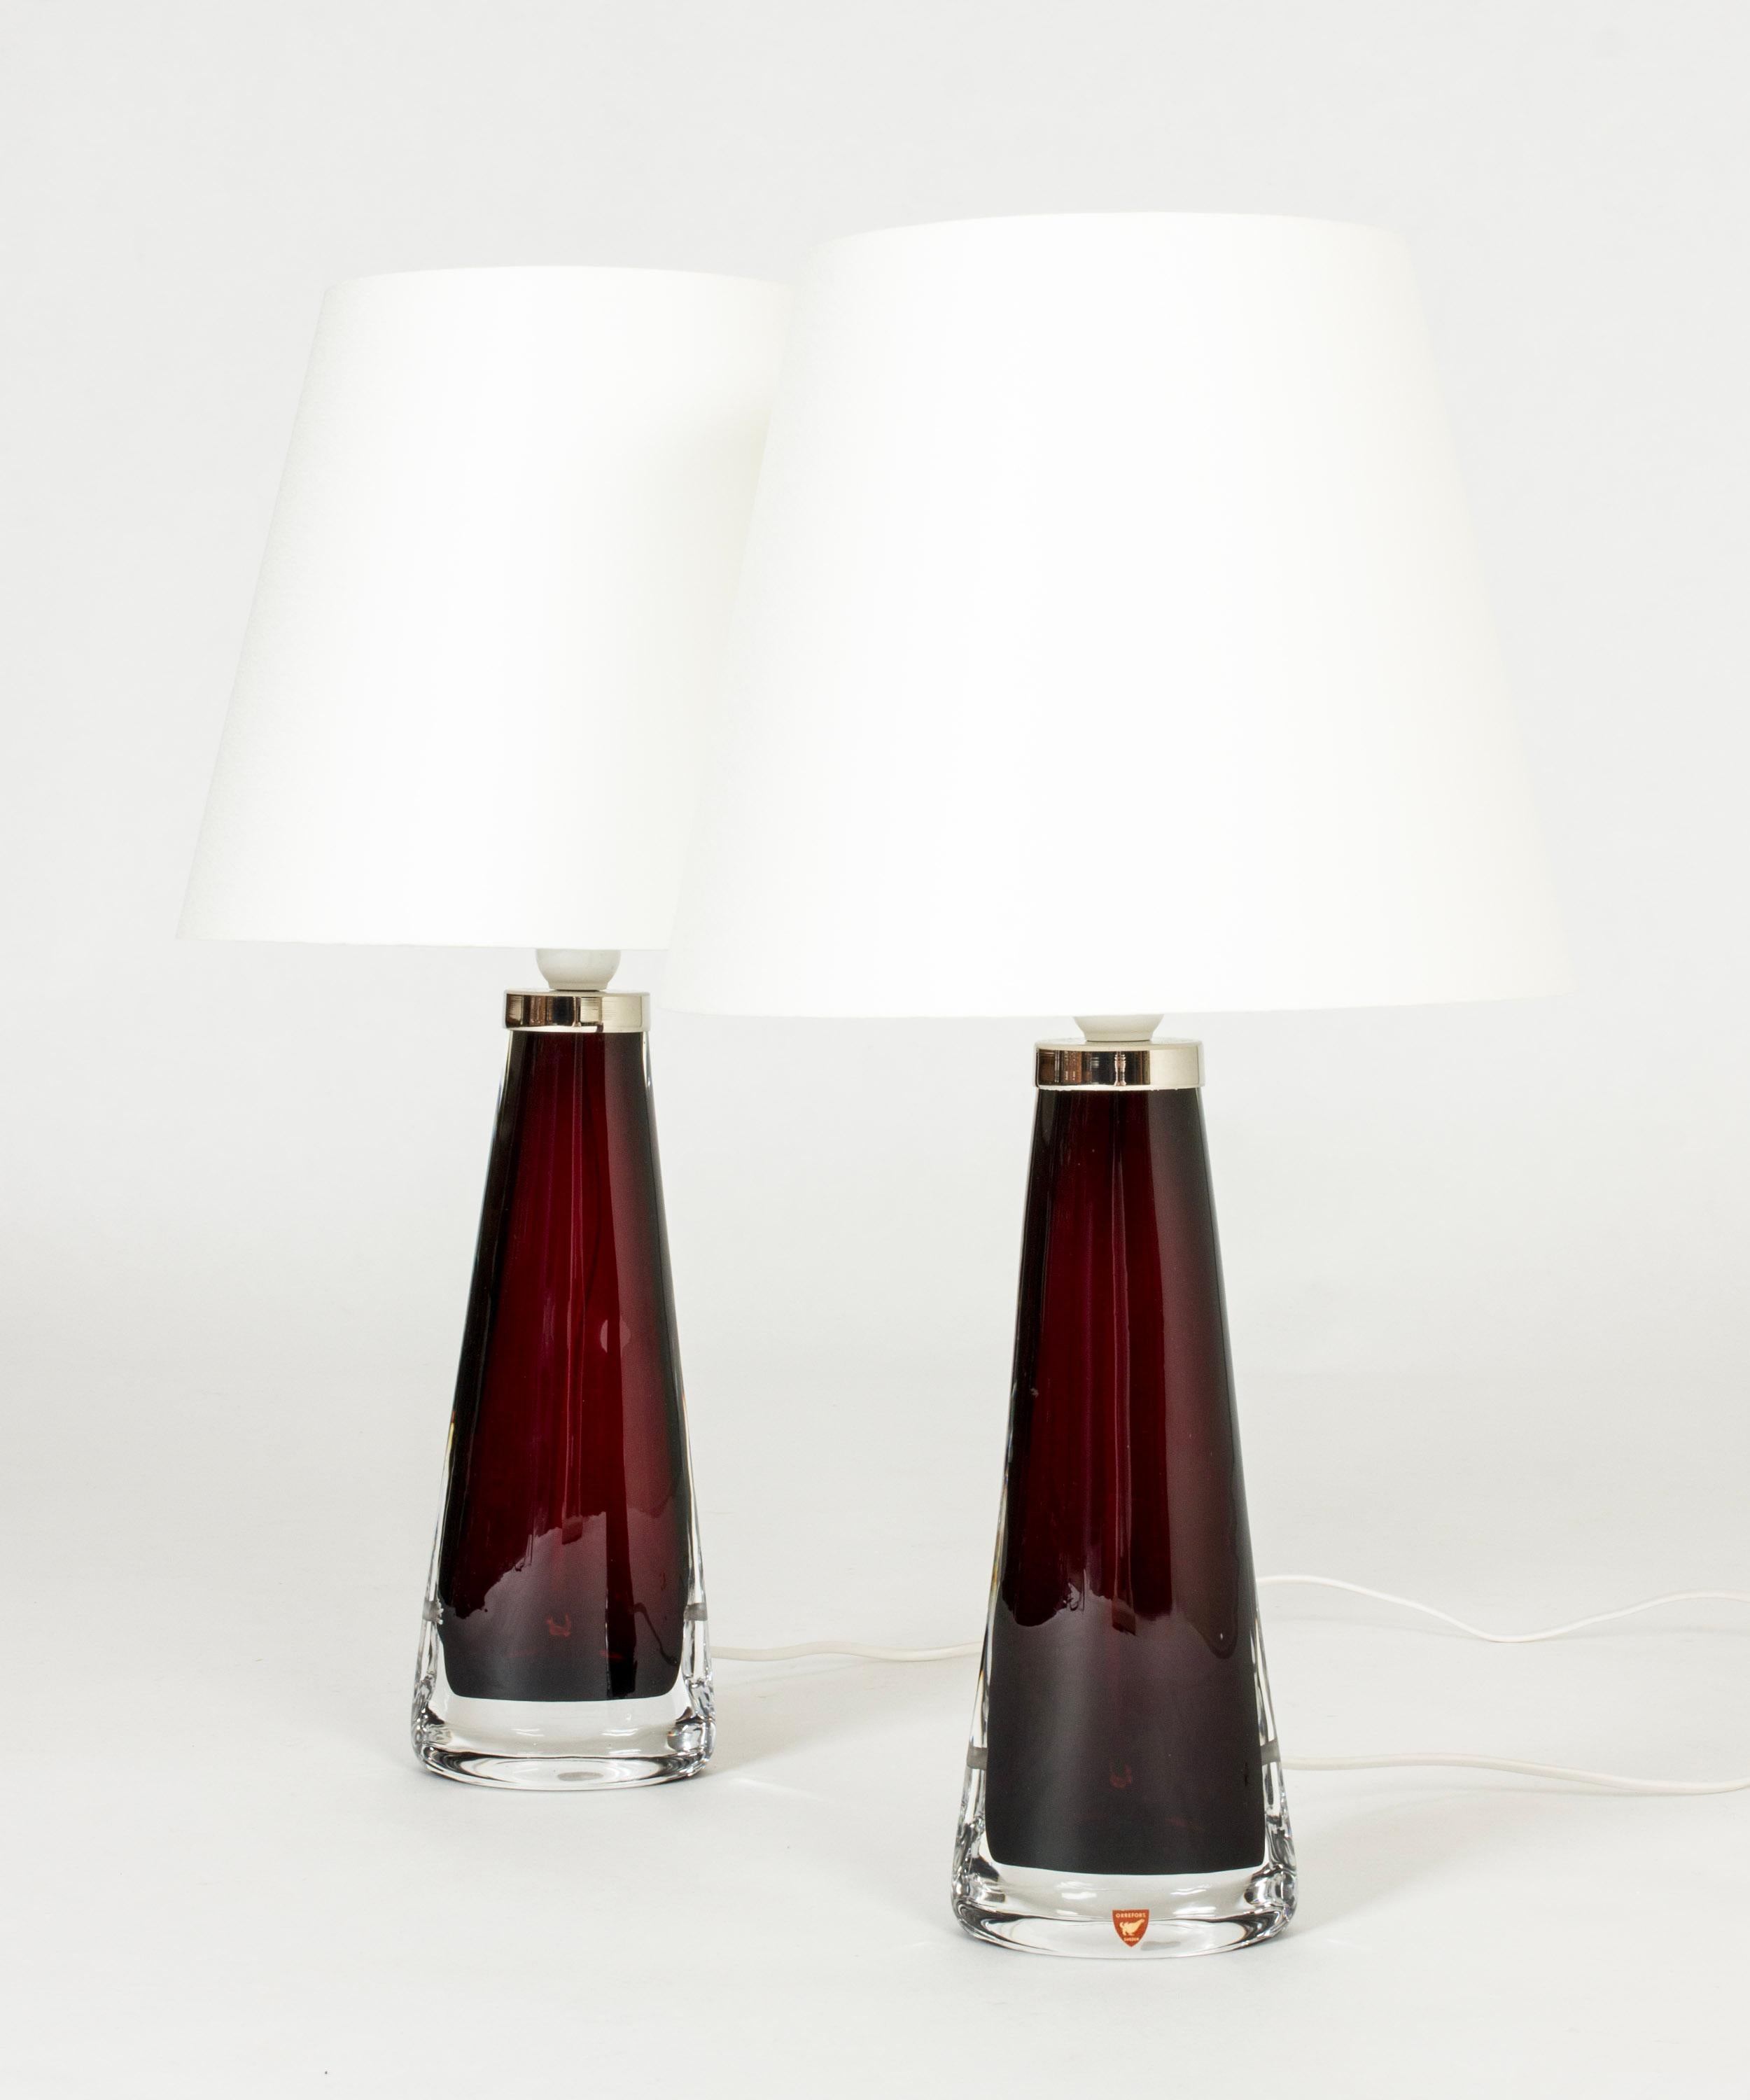 Pair of crystal glass table lamps by Carl Fagerlund, made from burgundy colored glass in a narrow conical shape, almond shaped at the base. Beautiful translucent color, elegant design.